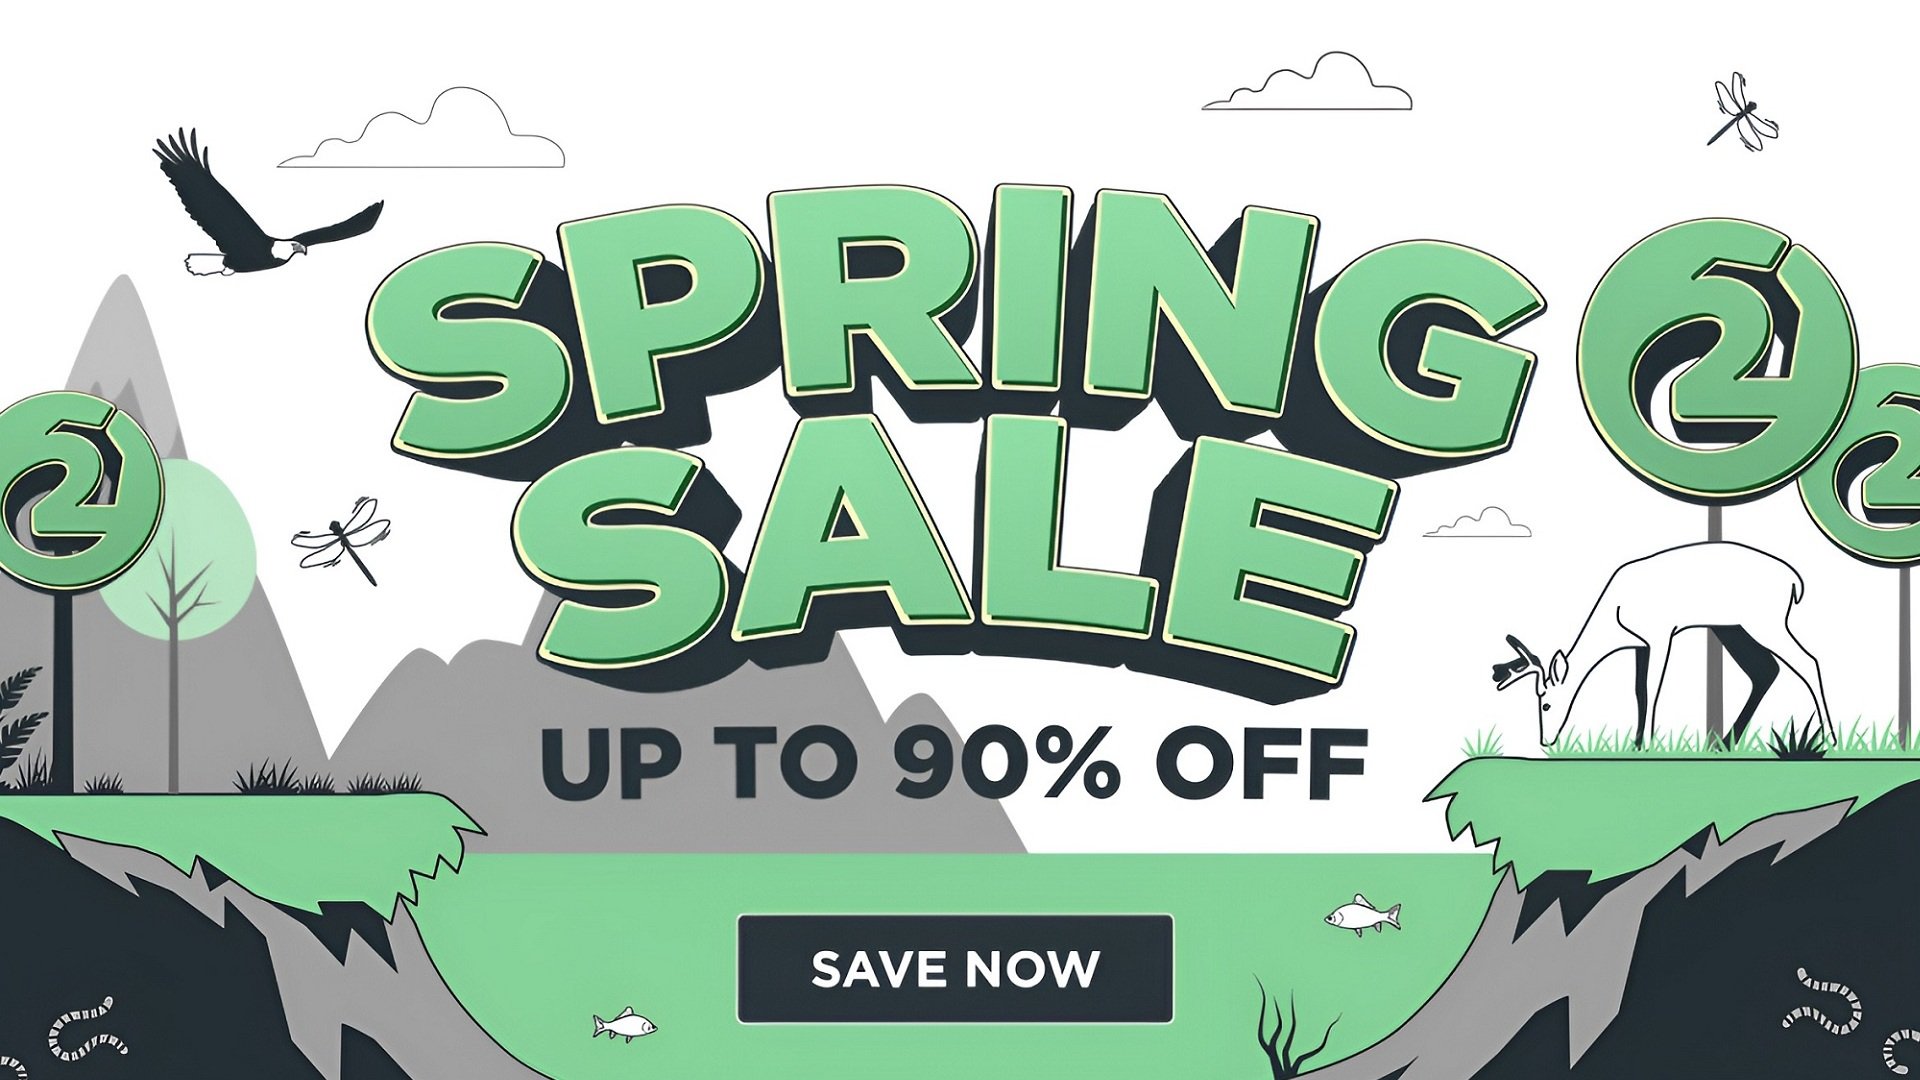 The 2Game Spring Sale 2023 is Now Live - Get Up To 90% Off!